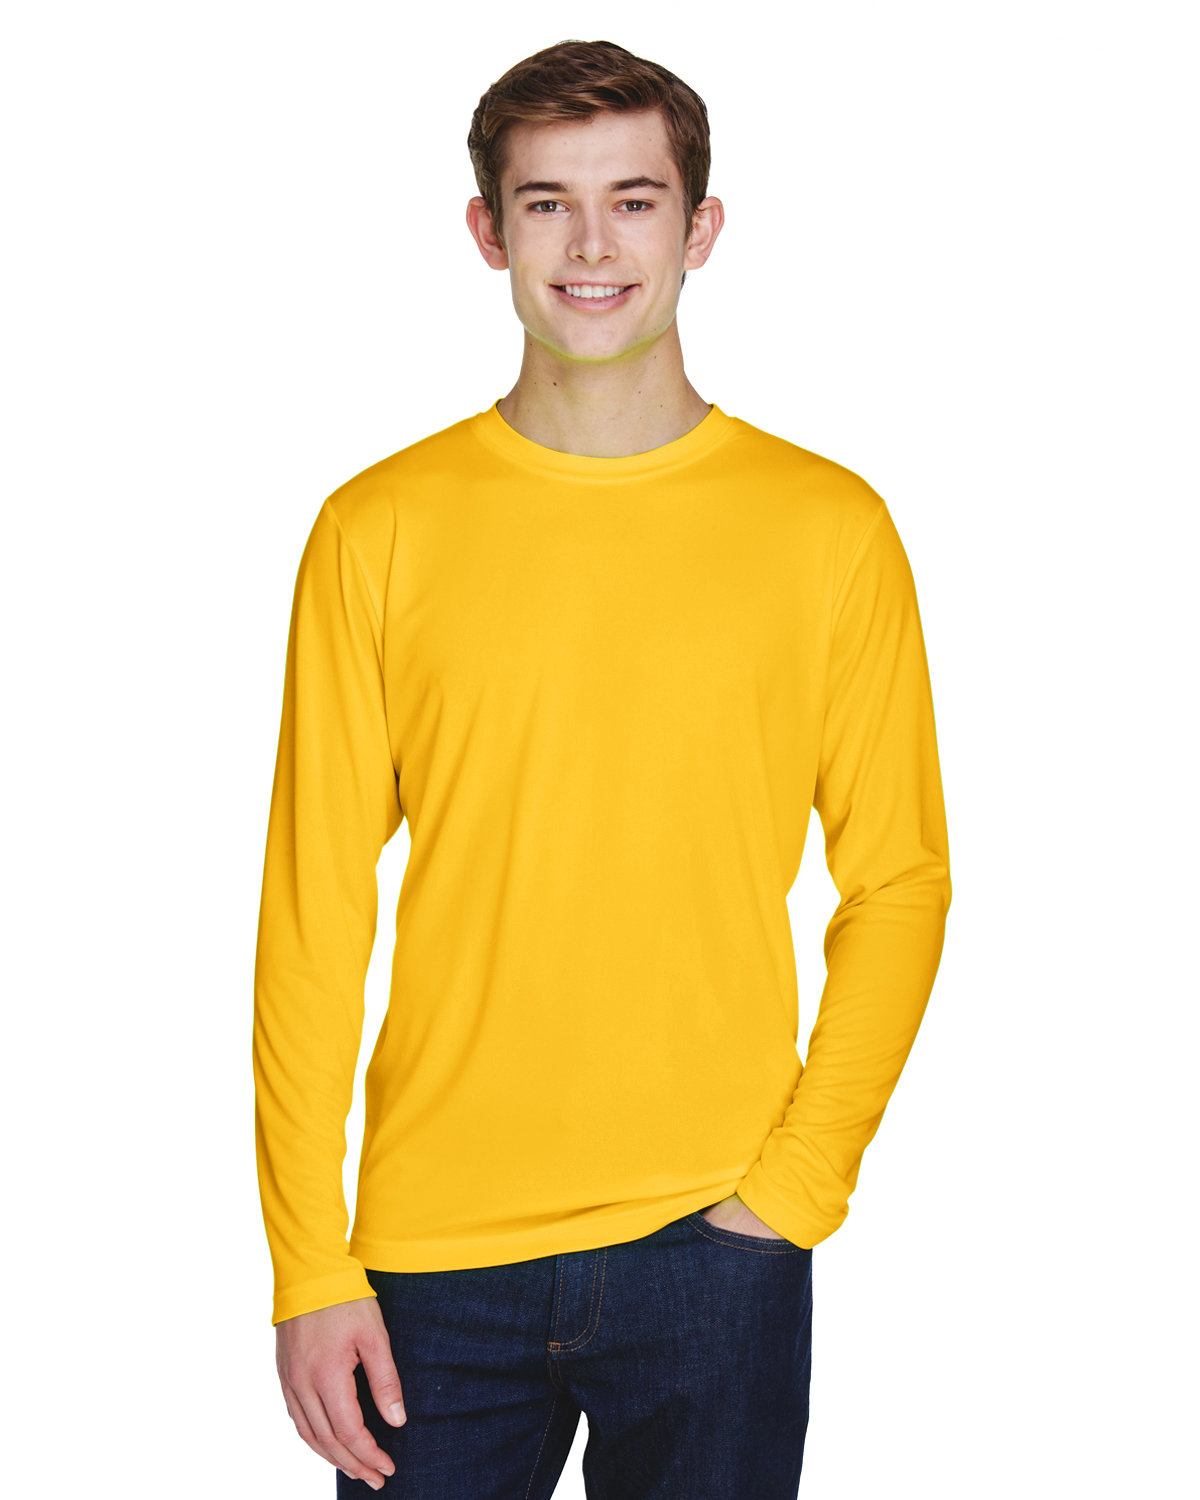 Team 365 Men's Zone Performance Long-Sleeve T-Shirt SP ATHLETIC GOLD 